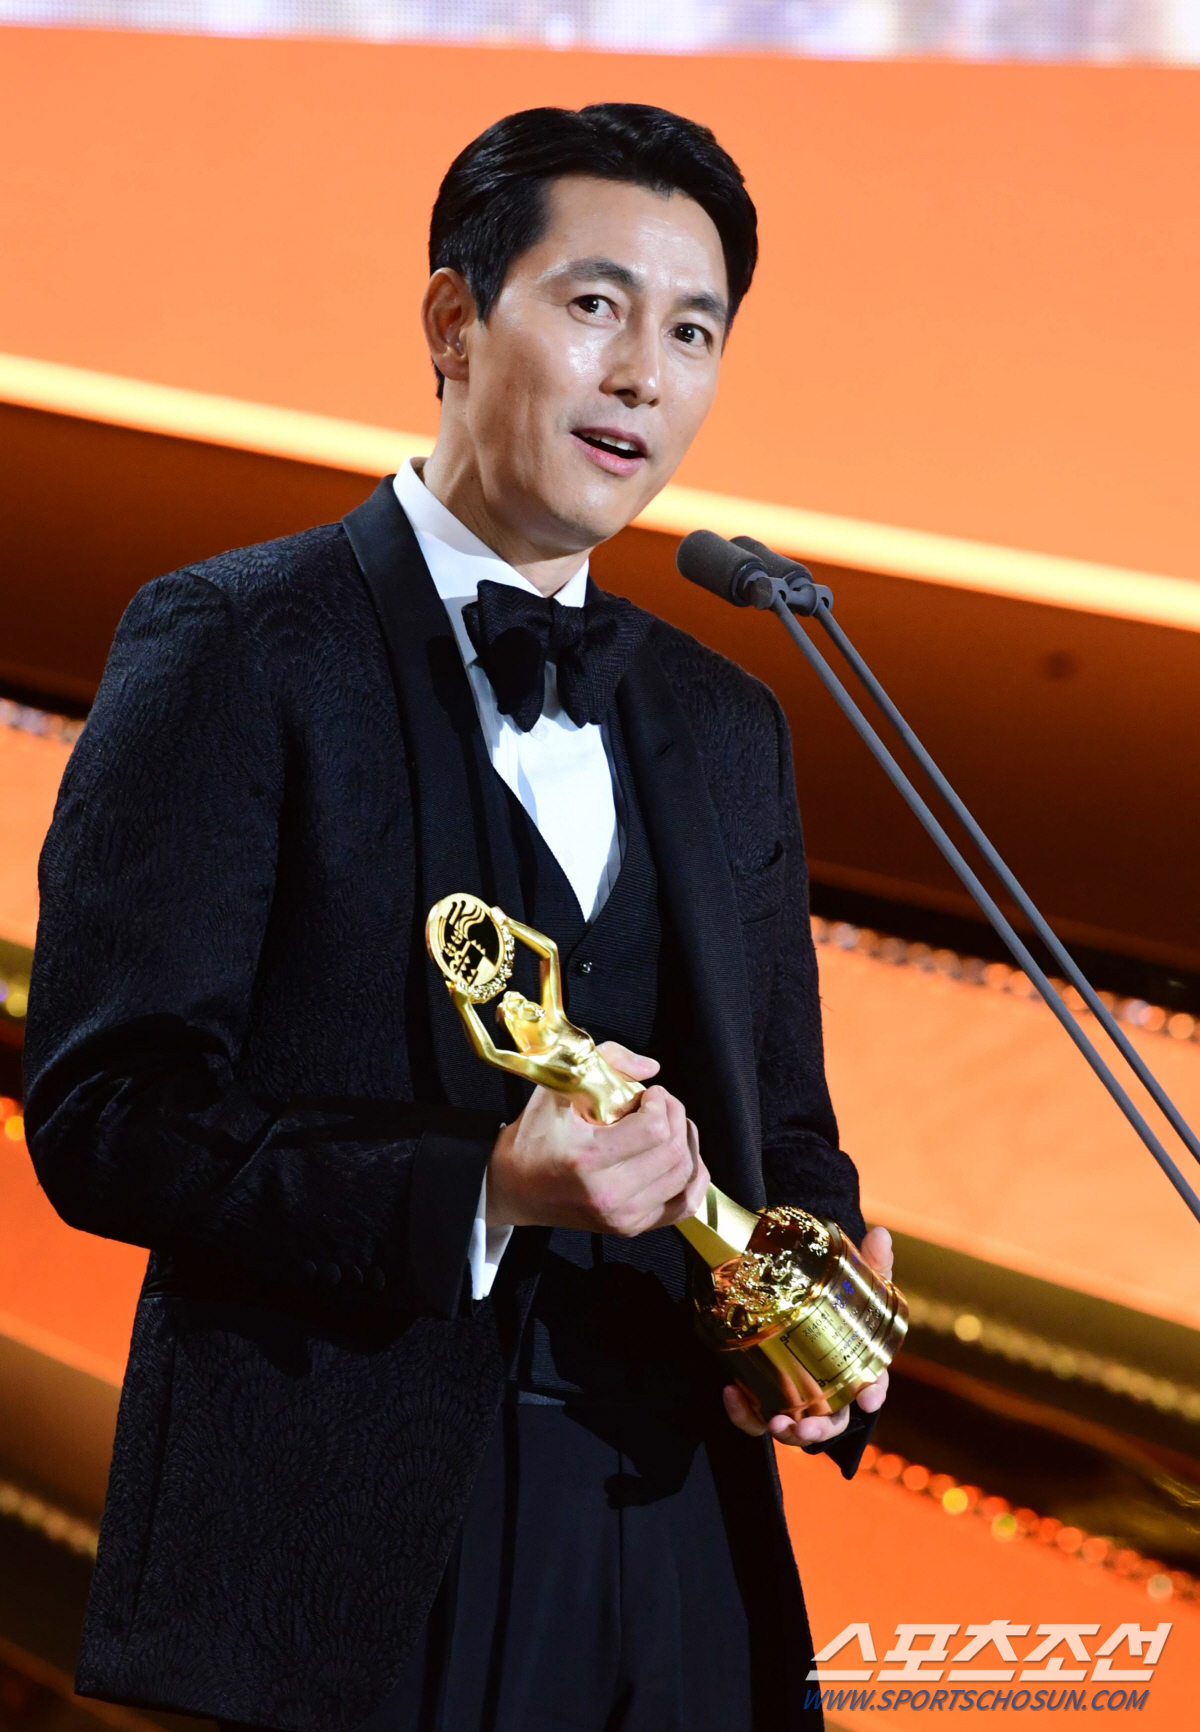 Its been 25 years since I debuted.Actor Jung Woo-sung (46), an icon of youth who swept screens and tubes in the 1990s, finally won the first starring award in the Blue Dragon and was the best actress of his life.Jung Woo-sung became the hero of the 40th Blue Dragon Film Award Academy Awards through the movie Innocent Witness.He won the best lead award as an actor after competing with prominent candidates such as Ryu Seung-ryong (extreme occupation), Seol Kyung-gu (birthday), Song Kang-ho (parasite), and Cho Jeong-seok (excit).It is the first Blue Dragon Academy Awards trophy to debut in 1994 with the movie Gumiho and be held in the arms in 25 years.Jung Woo-sung, who was recognized as Actor of Chungmuro through the stage of Blue Dragon in Icon of Youth in the past.For him, the first Blue Dragon Academy Awards have remained the biggest Hwanhee moment since his debut.He also did not have a relationship between Jung Woo-sung and Blue Dragon.Jung Woo-sung won the popular star award in 20, 22, 29 and 37 times in Blue Dragon, but it had to be evaluated 1% in acting ability.Starting with his name being nominated for the 18th Blue Dragon Academy Awards (Bit) in 1997, he has been named as a candidate for the 24th Academy Awards (Dung Dog), 34th Best Supporting Actor (Watchers), 35th Academy Awards (Number of God), 37th Academy Awards (Asura), as many as four Academy Awards, one Best Supporting Actor nominee. I was saddened by the fact that I could not see the fruits at the threshold of the awards.The work that gave Jung Woo-sung the first Blue Dragon star, Hwanhee, is Innocent Witness.A work that depicts the story of a lawyer who must prove the innocence of the powerful Murder The Suspect meeting an autistic girl who is the only witness to the scene of the incident.Jung Woo-sung played the lawyer Sun Ho of Murder The Suspect.In Innocent Witness, which offers a special sympathy between Murder The Suspects lawyer and the only witness autistic girl, two characters who can never get close, Jung Woo-sung resonated with those who delicately expressed the amplitude of changing emotions as they met girl Jiu.With the existing intense image and a new charm with a human and warm character, the screen was hot this year.Jung Woo-sung, who opened his new heyday with the first Academy Awards of his life in six games in five games on the stage of Blue Dragon this year.In Icon of Youth, Chungmuros Believe and See Actor will be welcomed in 2020.Soon after the awards were announced, Jung Woo-sung could not hide his look of dismay.Jung Woo-sung said, I knew parasites would receive it, I wanted to say this.(Snow) My brother cheered for my awards, and that became reality. I participated in quite a lot of Blue Dragon Film Awards, and Academy Awards are the first.I did not plan and dream, so I got this award. I thanked Lee Han and Kim Hyang Gi of Innocent Witness.Jung Woo-sung said, I think that a man who is watching my trophy in his hand more than anyone else, my friend Lee Jung-jae, will be delighted with me.I will share this joy with all of you. 